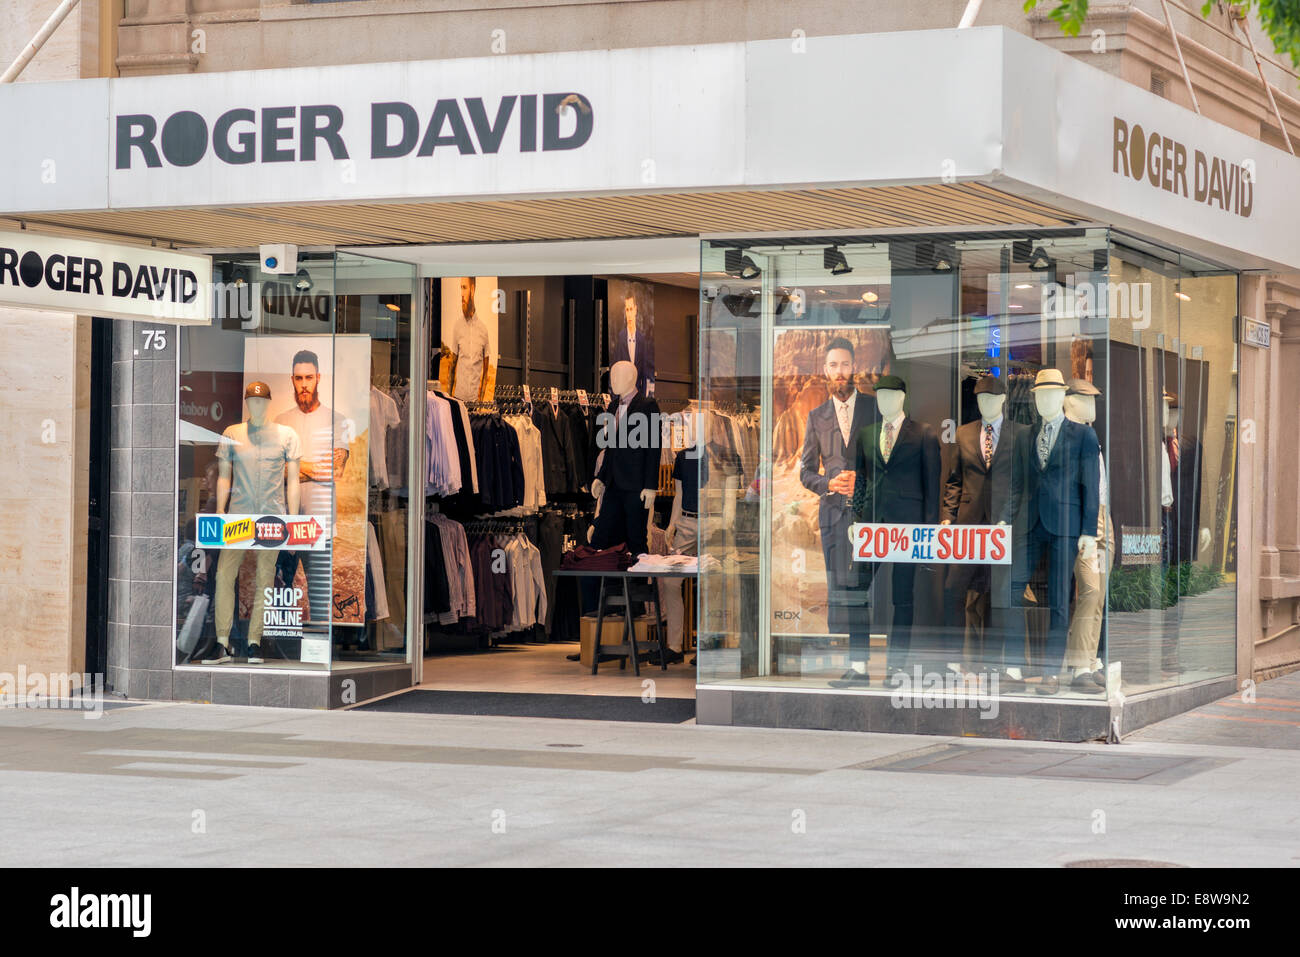 Roger David men's clothing shop front and signage Stock Photo